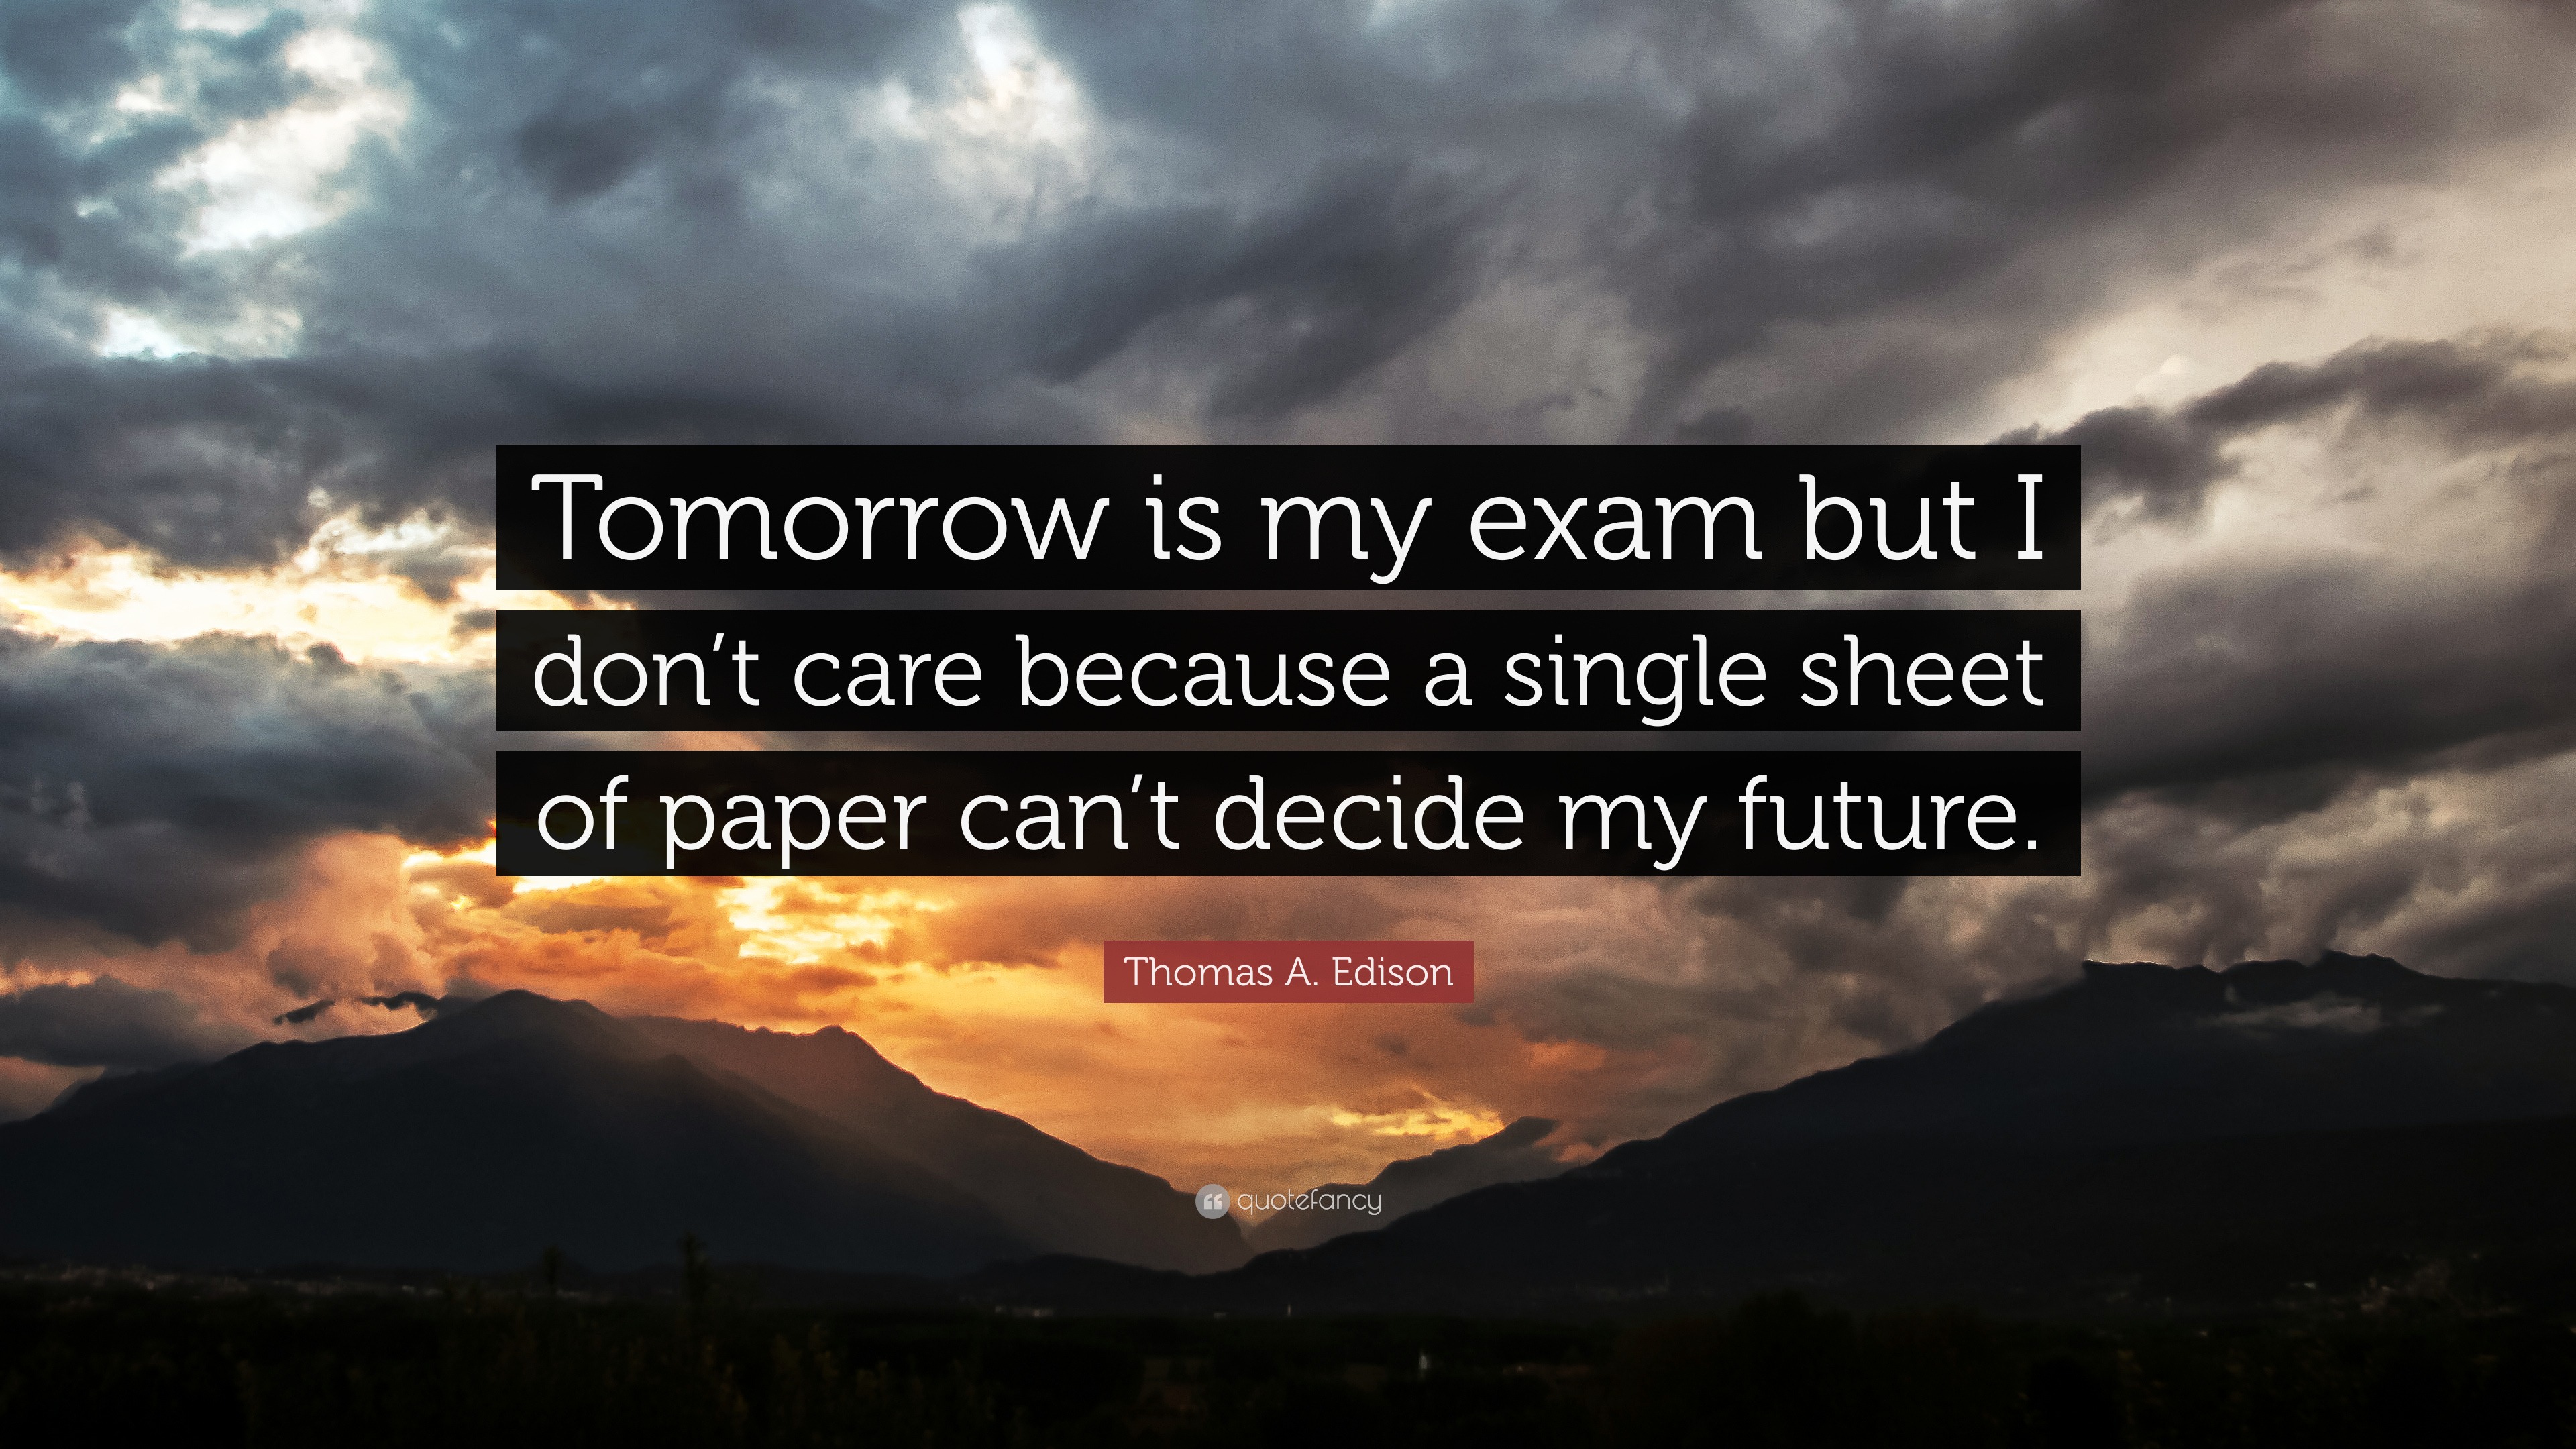 Thomas A. Edison Quote: “Tomorrow is my exam but I don’t care because a